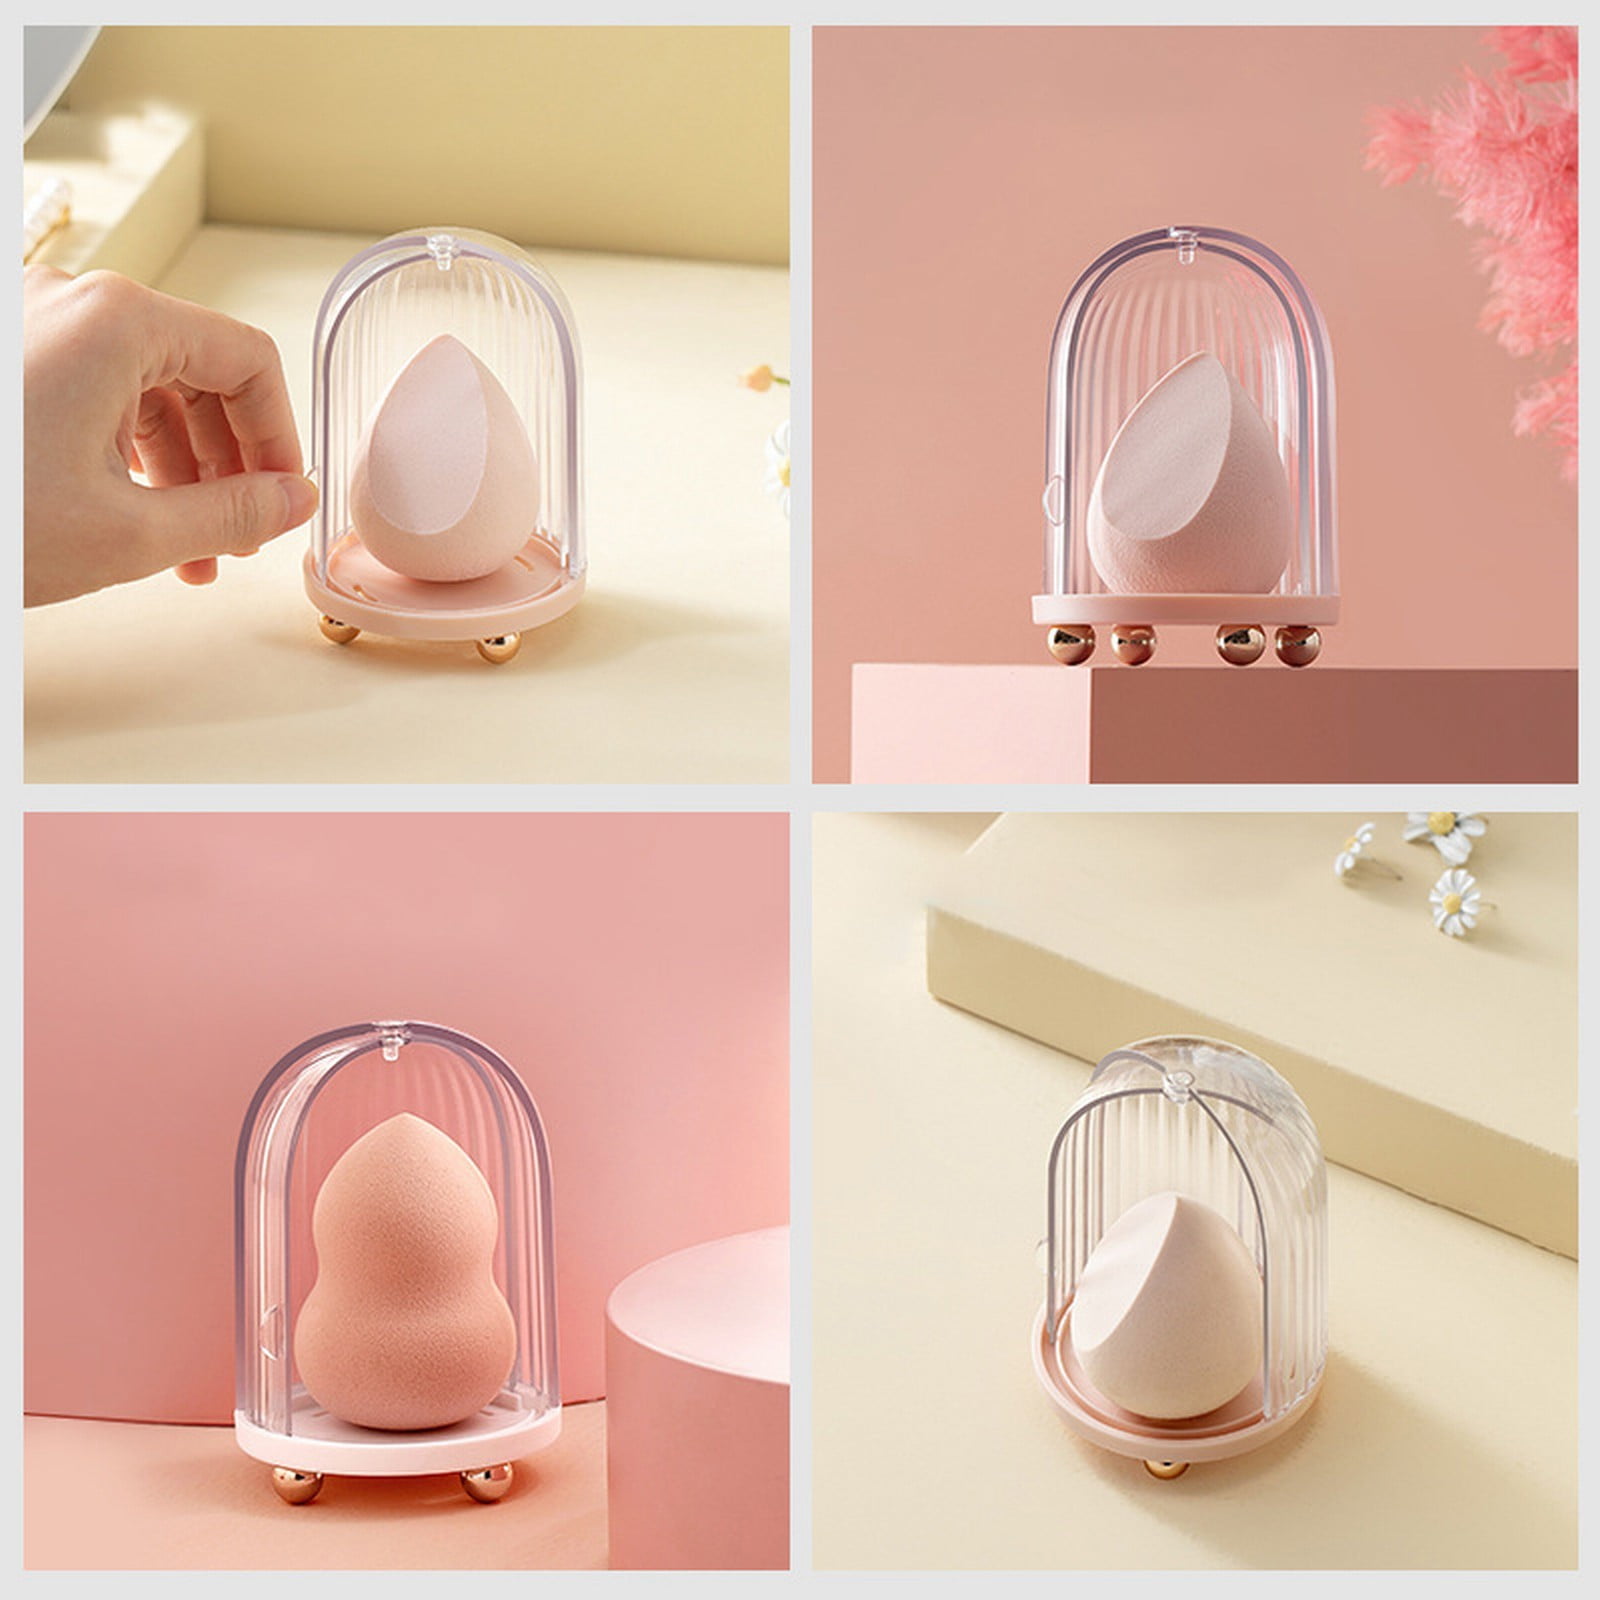 Beauty Keeper Square Storage Box For Transparent Face Masks, Puffs, Lashes,  And Cards Compact, Durable, And Versatile. From Parklondon, $0.83